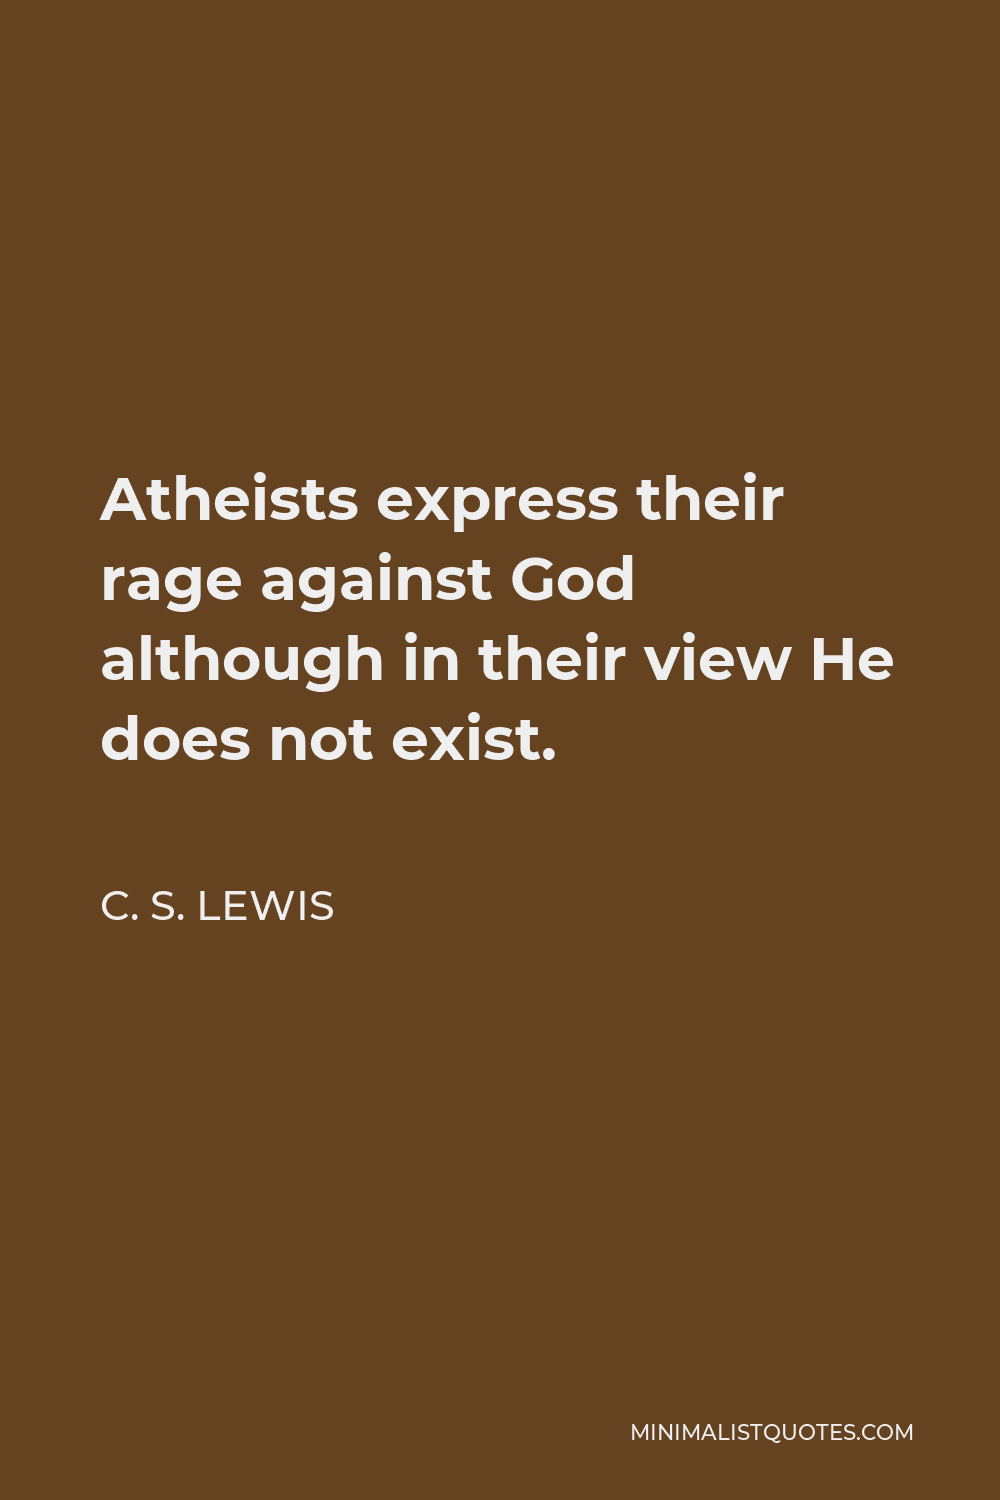 C. S. Lewis Quote - Atheists express their rage against God although in their view He does not exist.